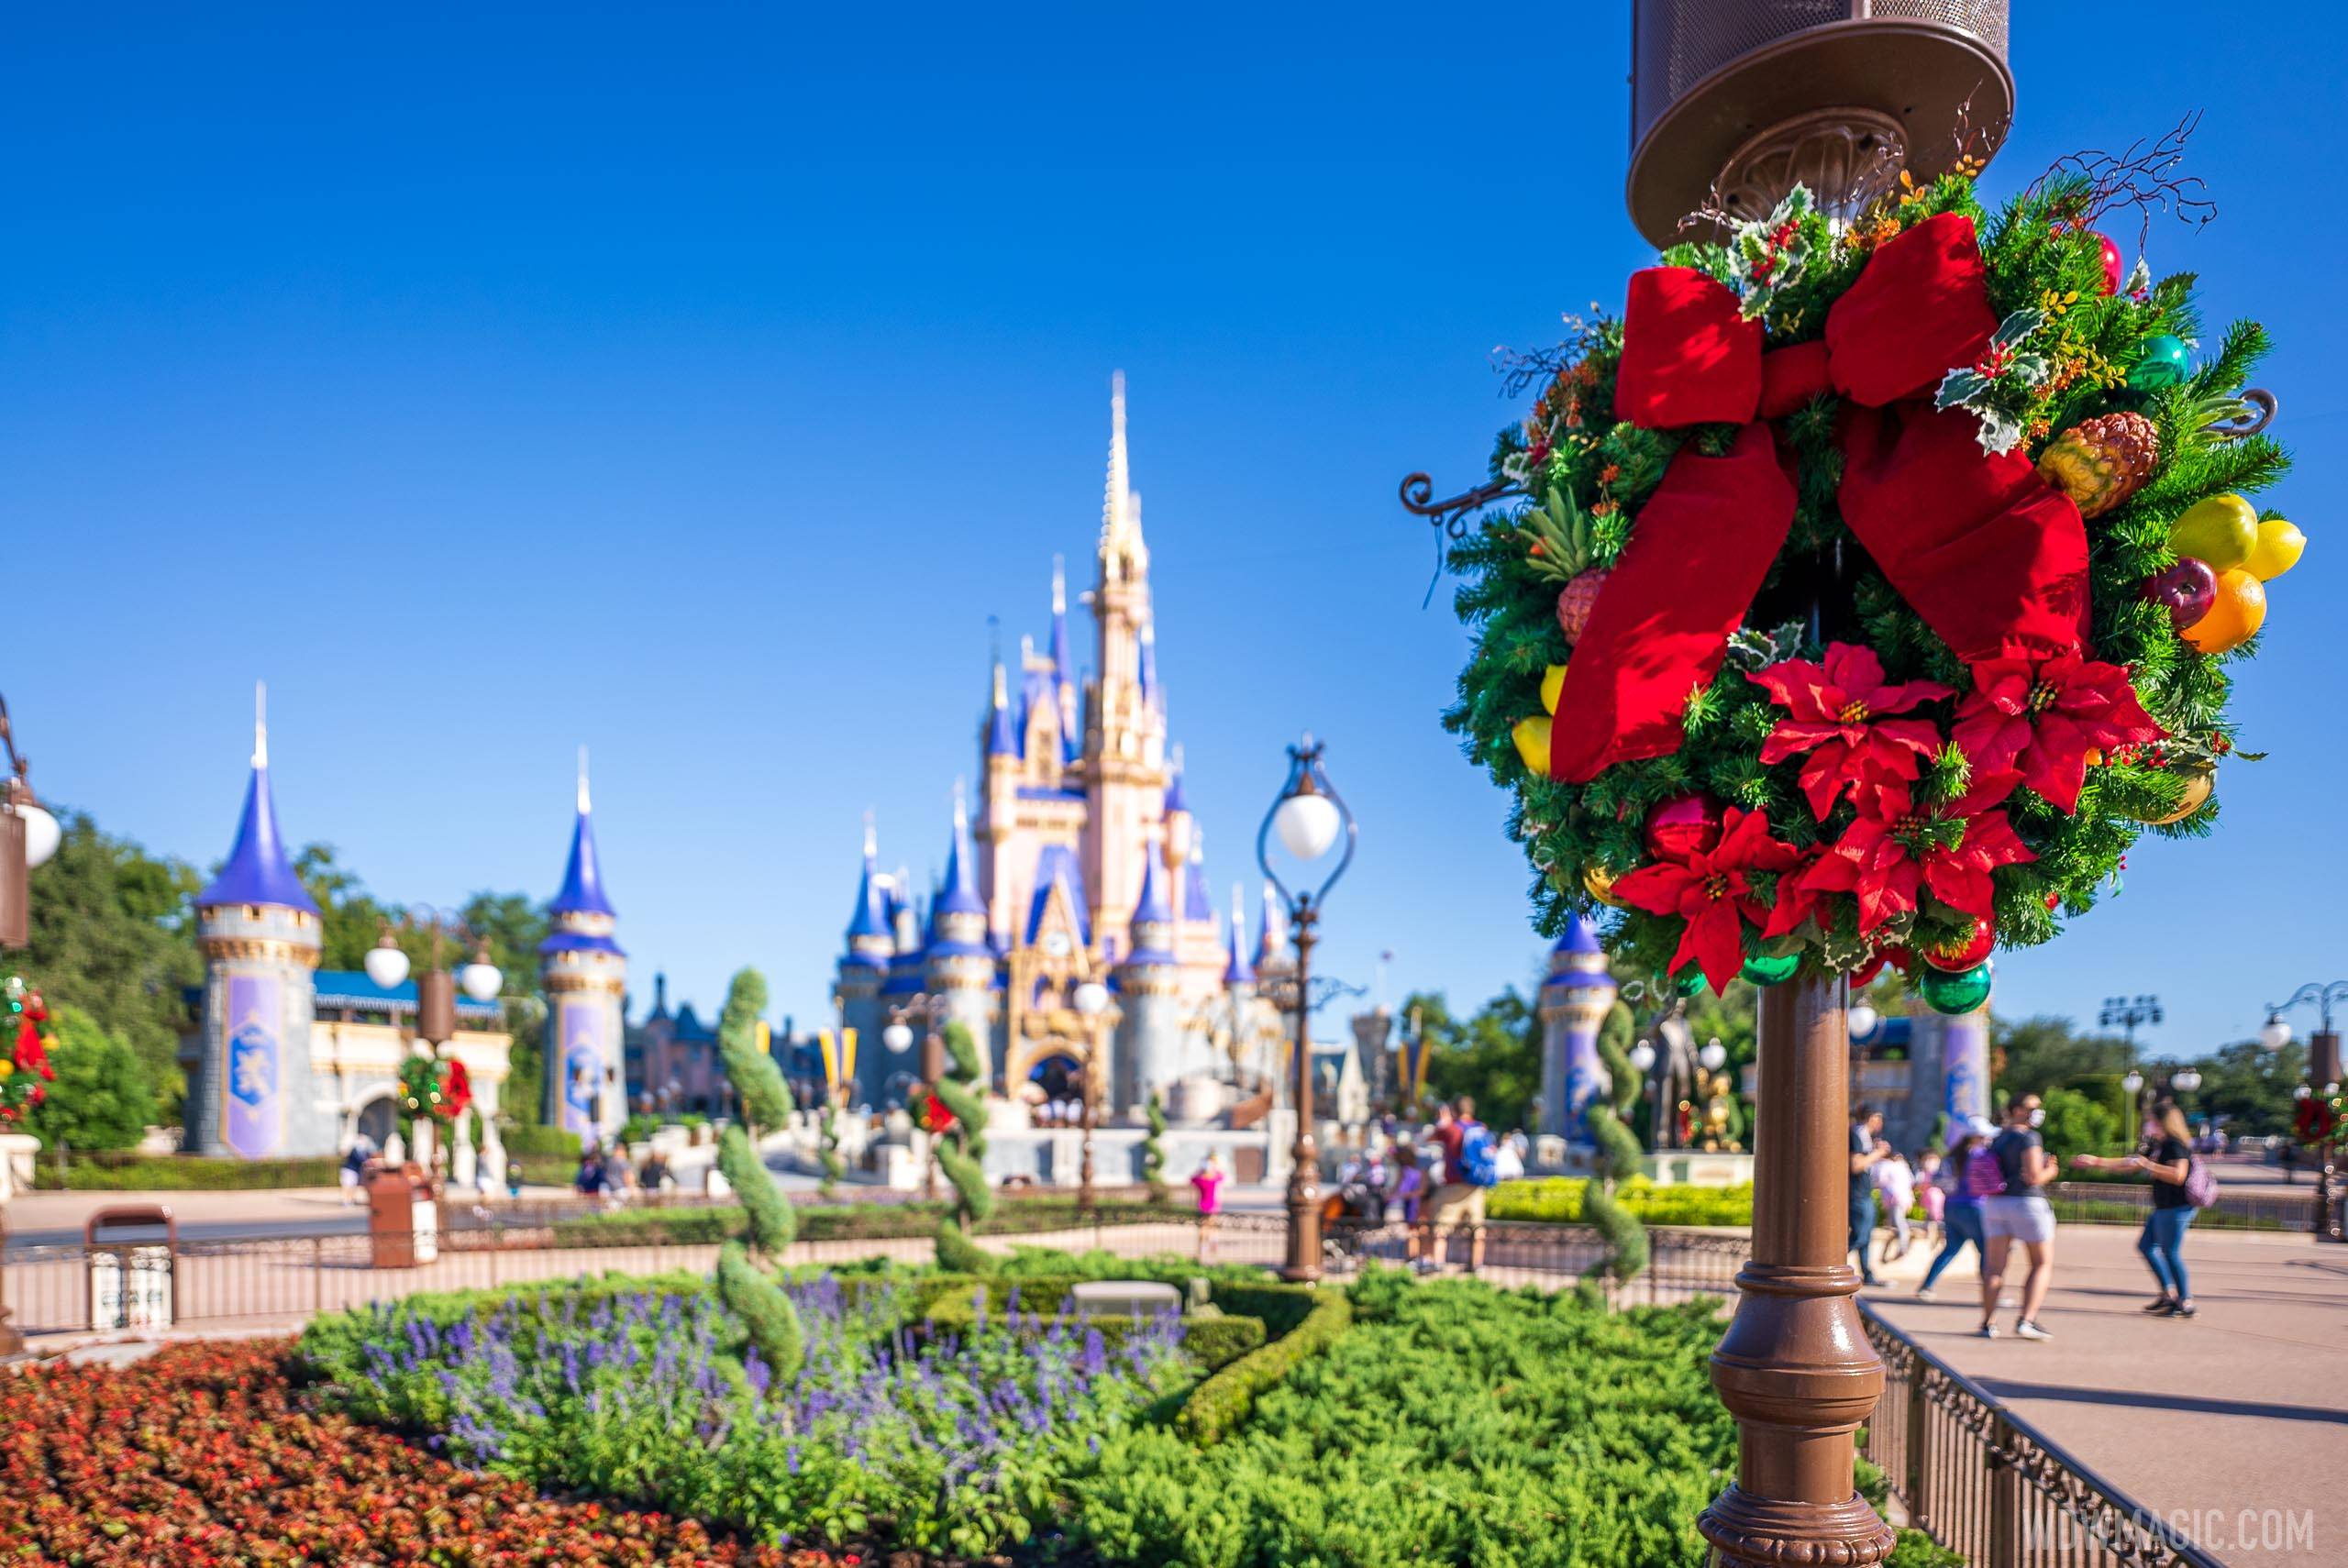 PHOTOS - Magic Kingdom now decorated for the holidays